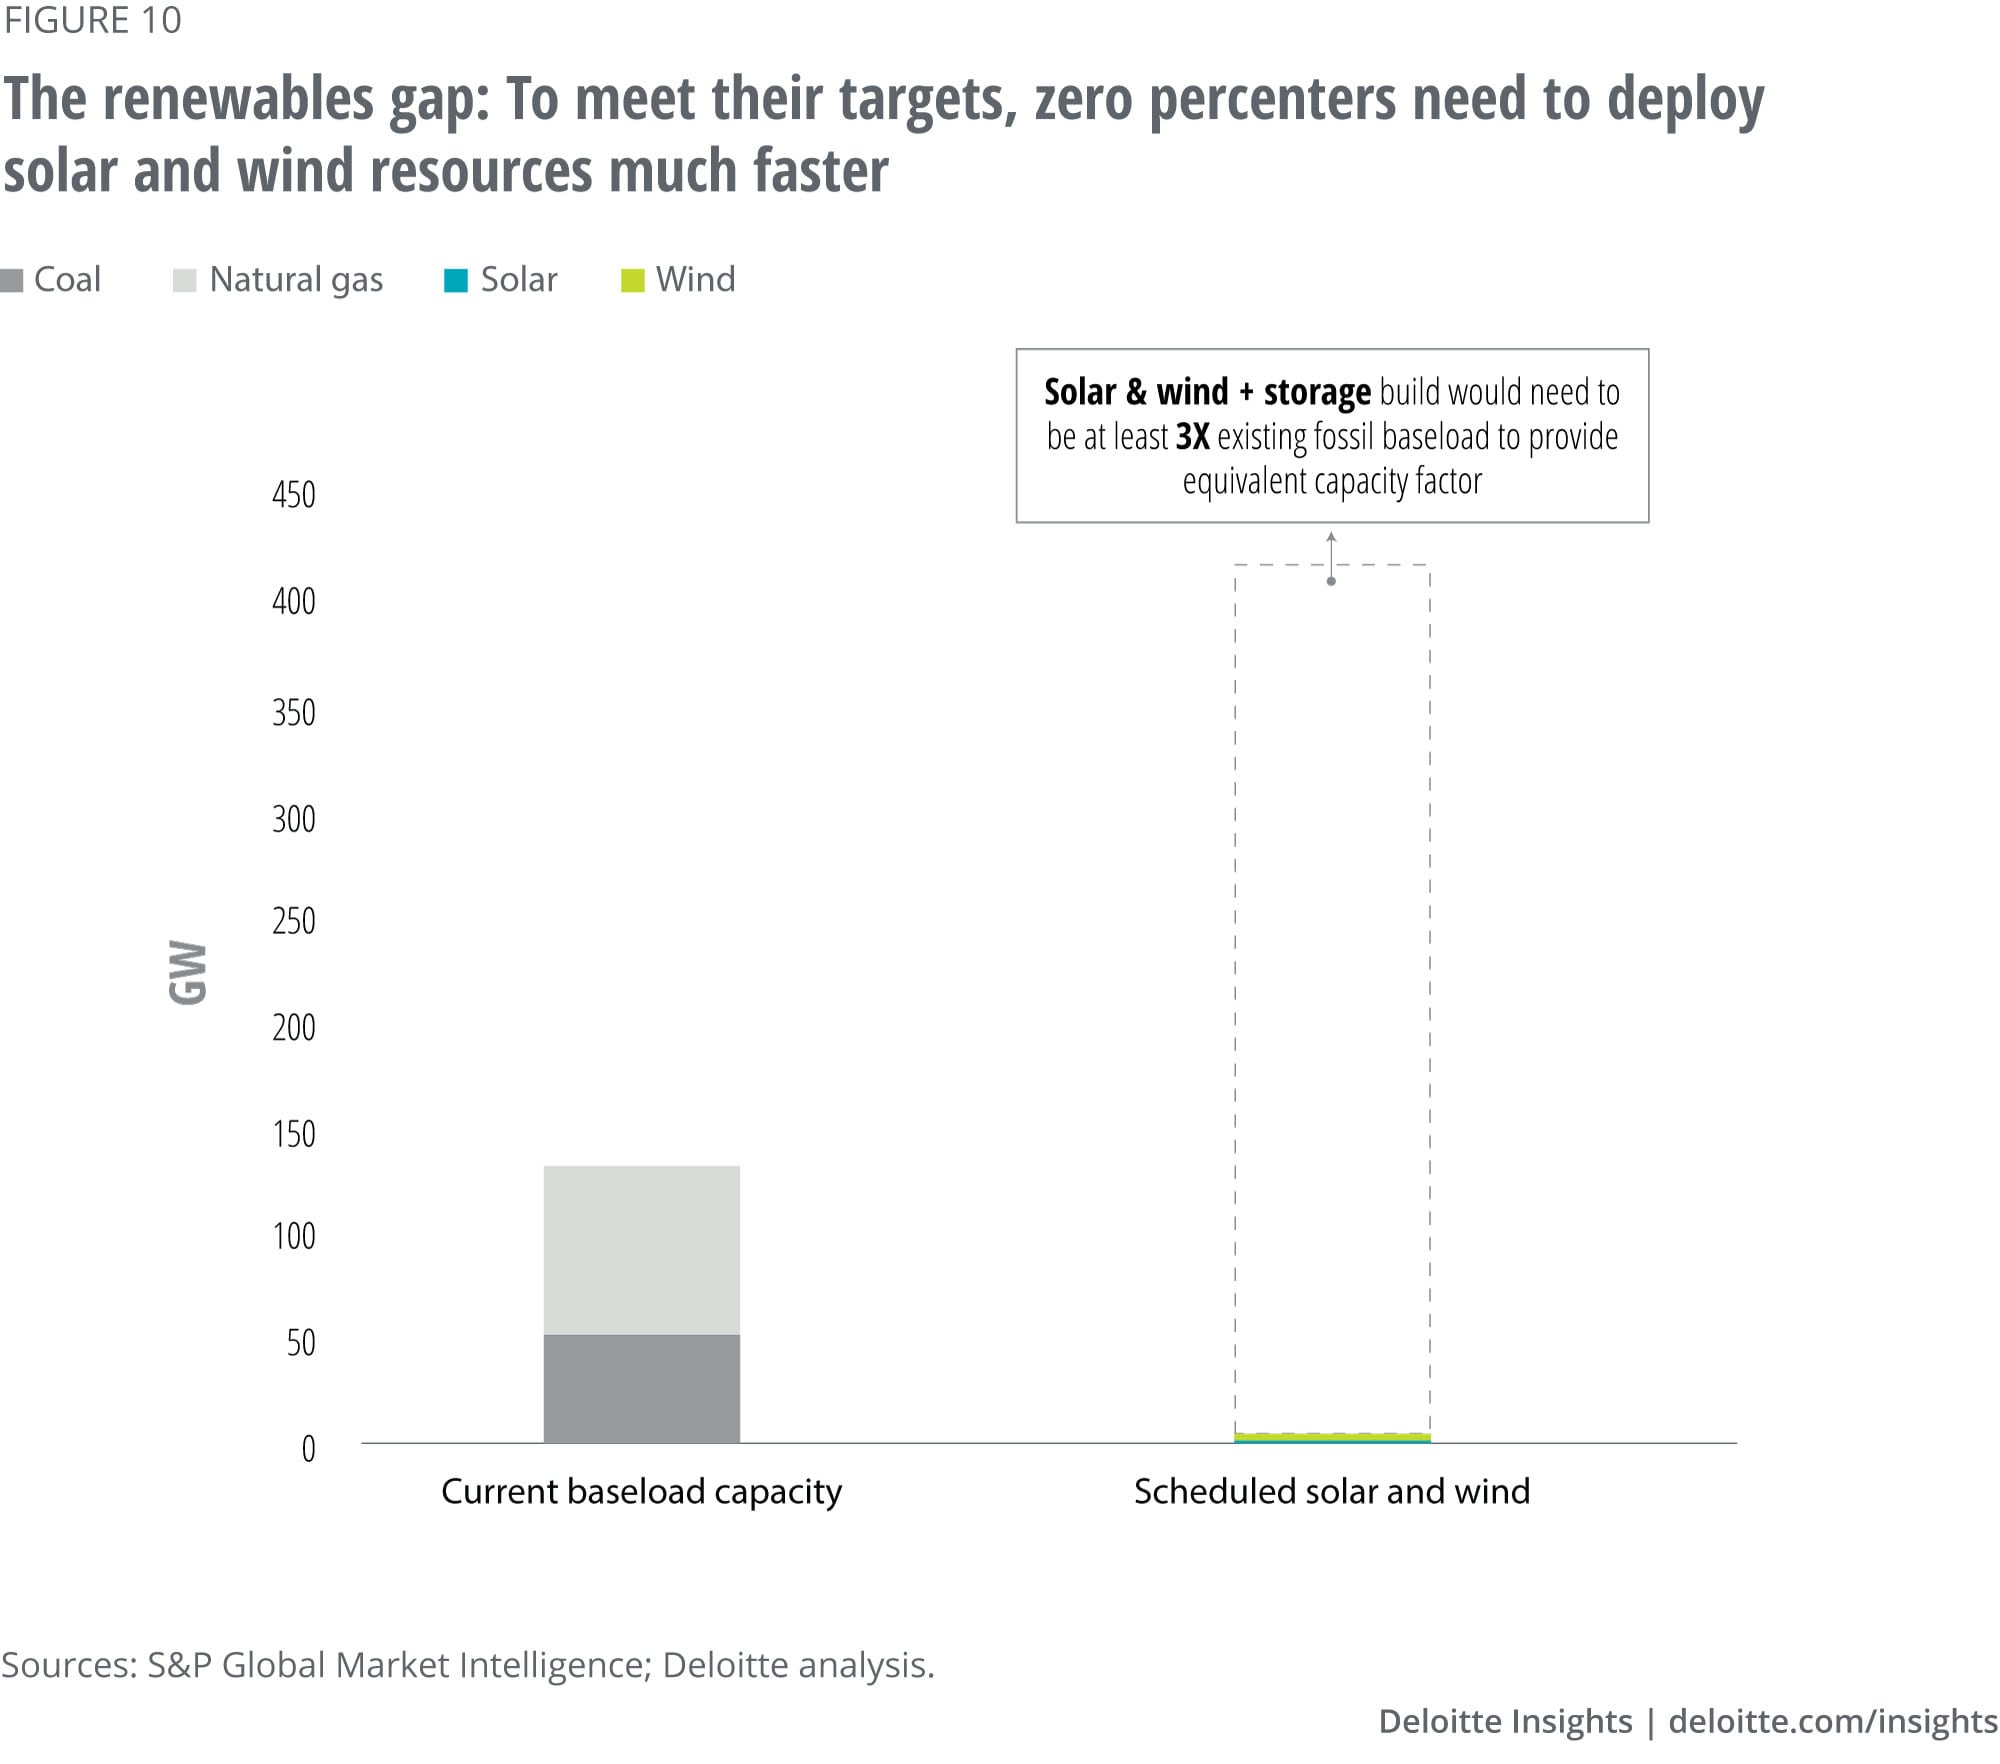 To meet their targets, zero percenters need much faster pace of deployment of solar and wind resources